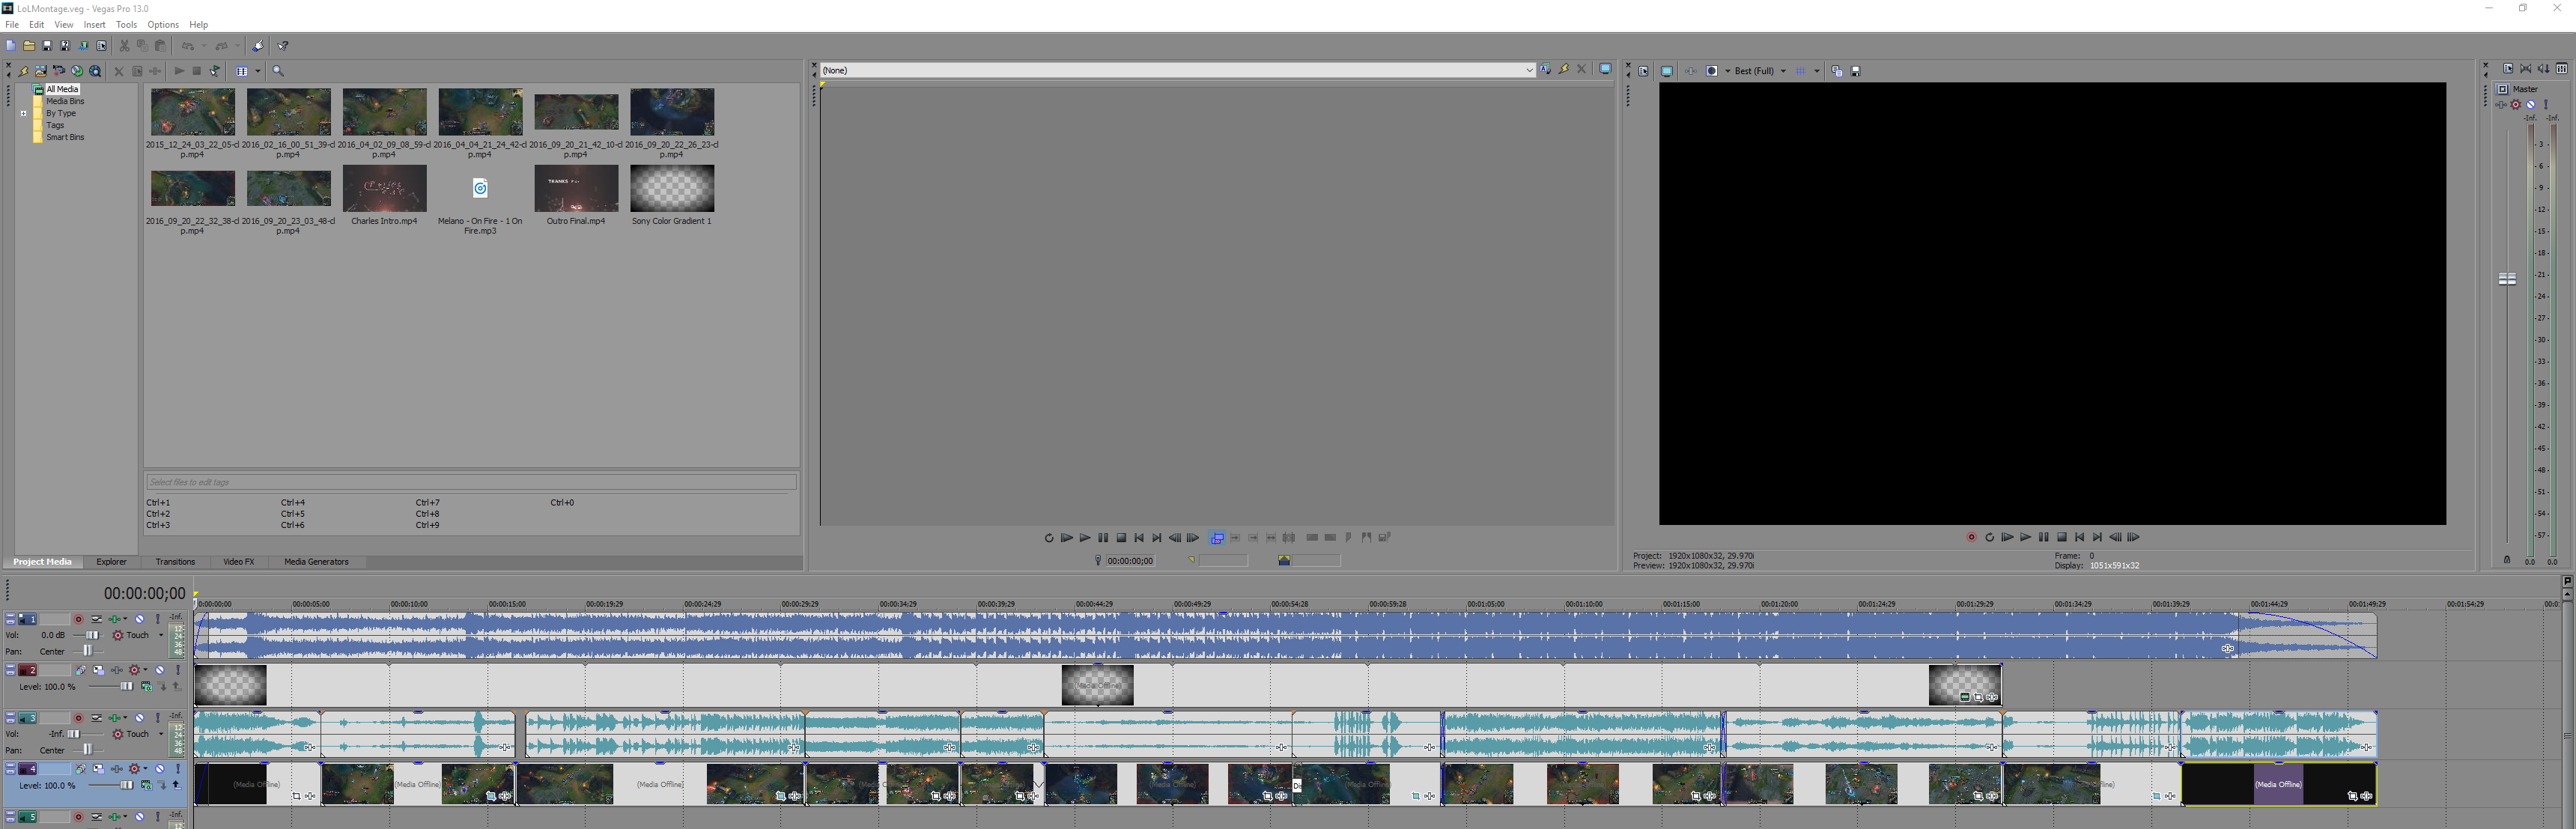 a print screen of the sony vegas pro interface.